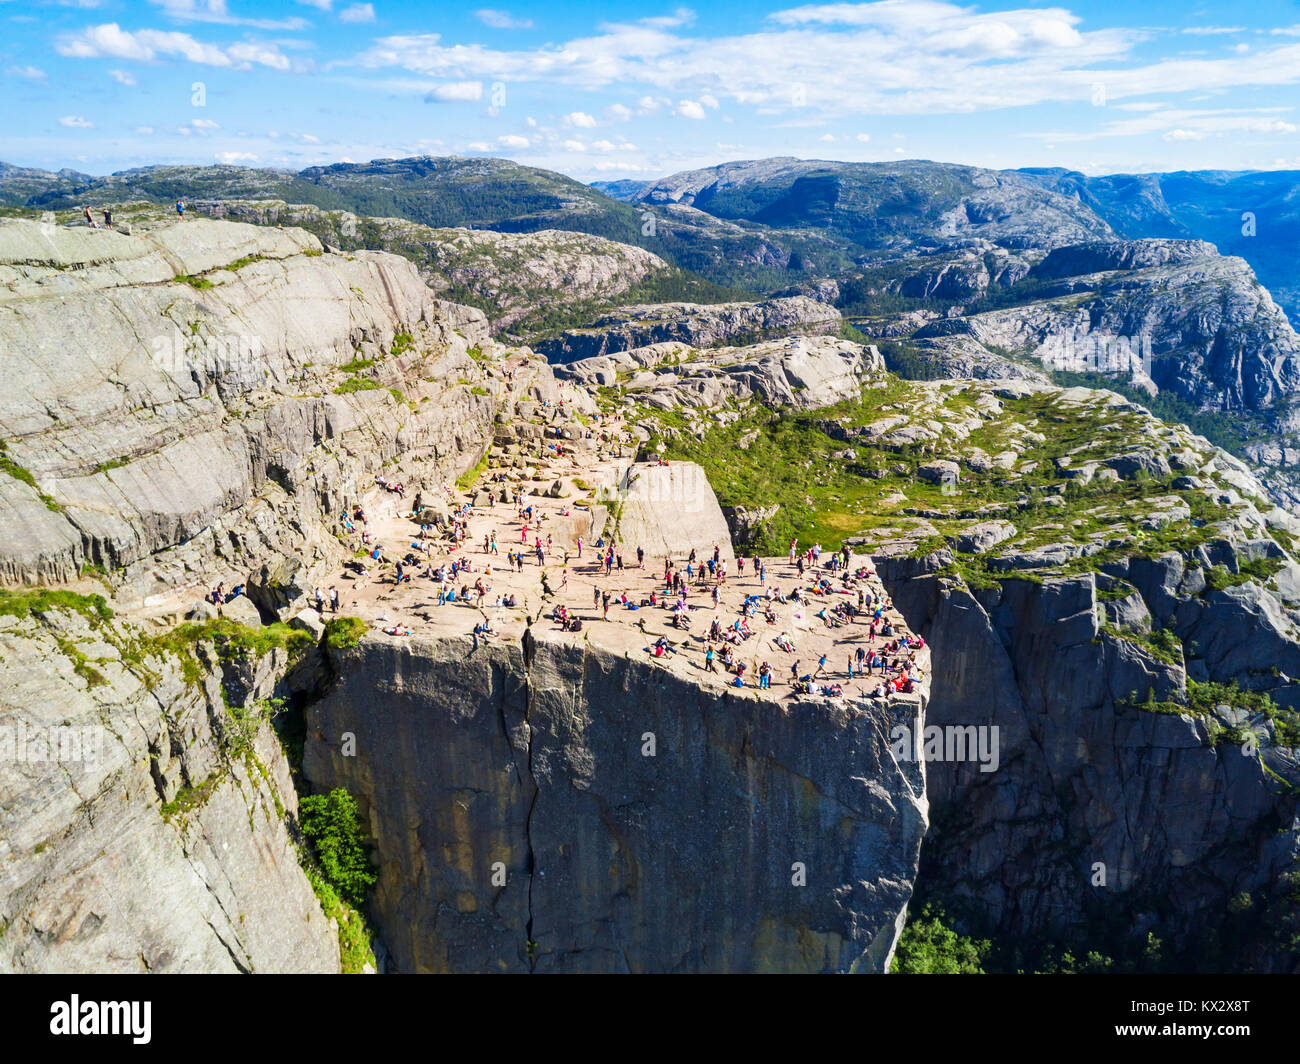 Preikestolen or Prekestolen or Pulpit Rock aerial panoramic view, Norway. Preikestolen is a steep cliff which rises above the Lysefjord. Stock Photo